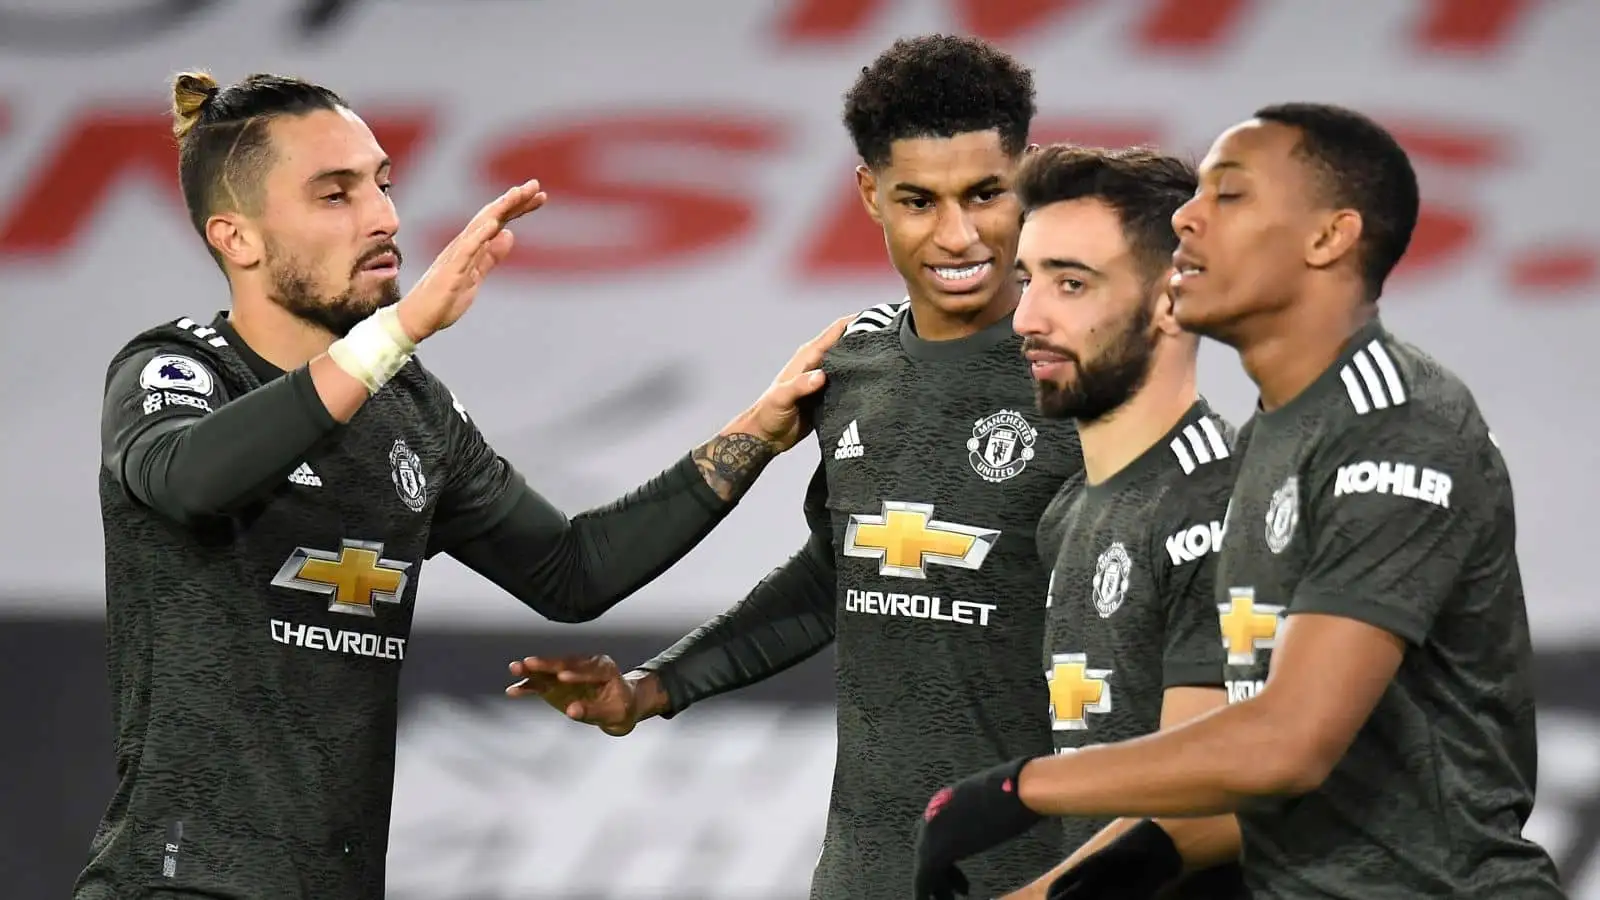 Erik Ten Hag ready to wield Man Utd axe, with a number of stars to leave. Here, Manchester United's Marcus Rashford (centre) celebrates scoring his side's third goal of the game with Alex Telles, Bruno Fernandes and Anthony Martial during the Premier League match at Bramall Lane, Sheffield